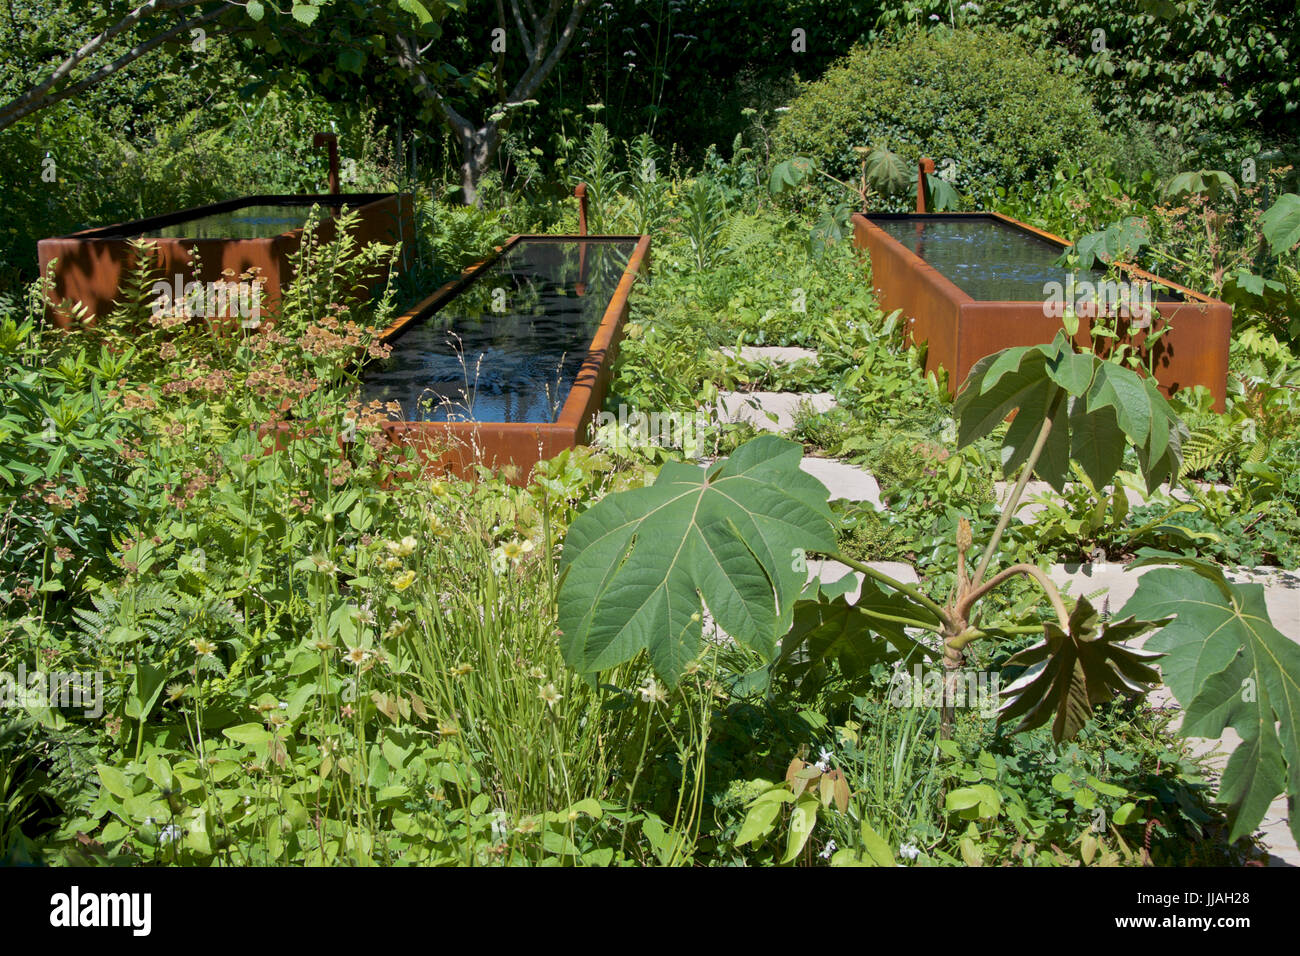 The Zoe Ball Listening Garden at RHS Chelsea Flower Show 2017 designed by  James Alexander Sinclair Stock Photo - Alamy